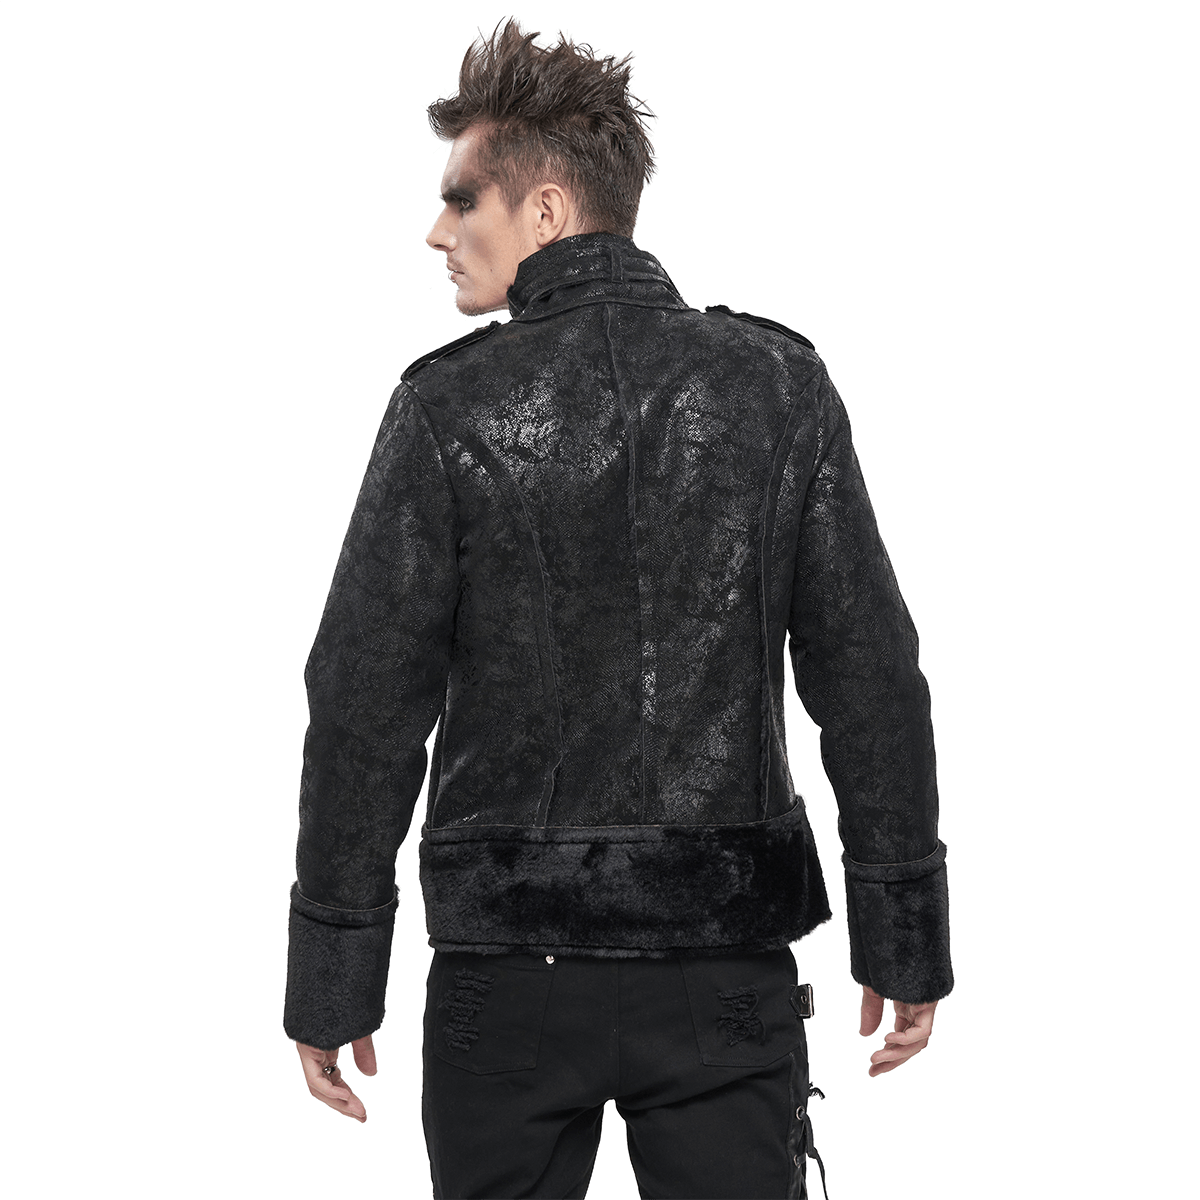 Gothic Stand Collar Splice Jacket with Buckle and Metal Pentagram - HARD'N'HEAVY